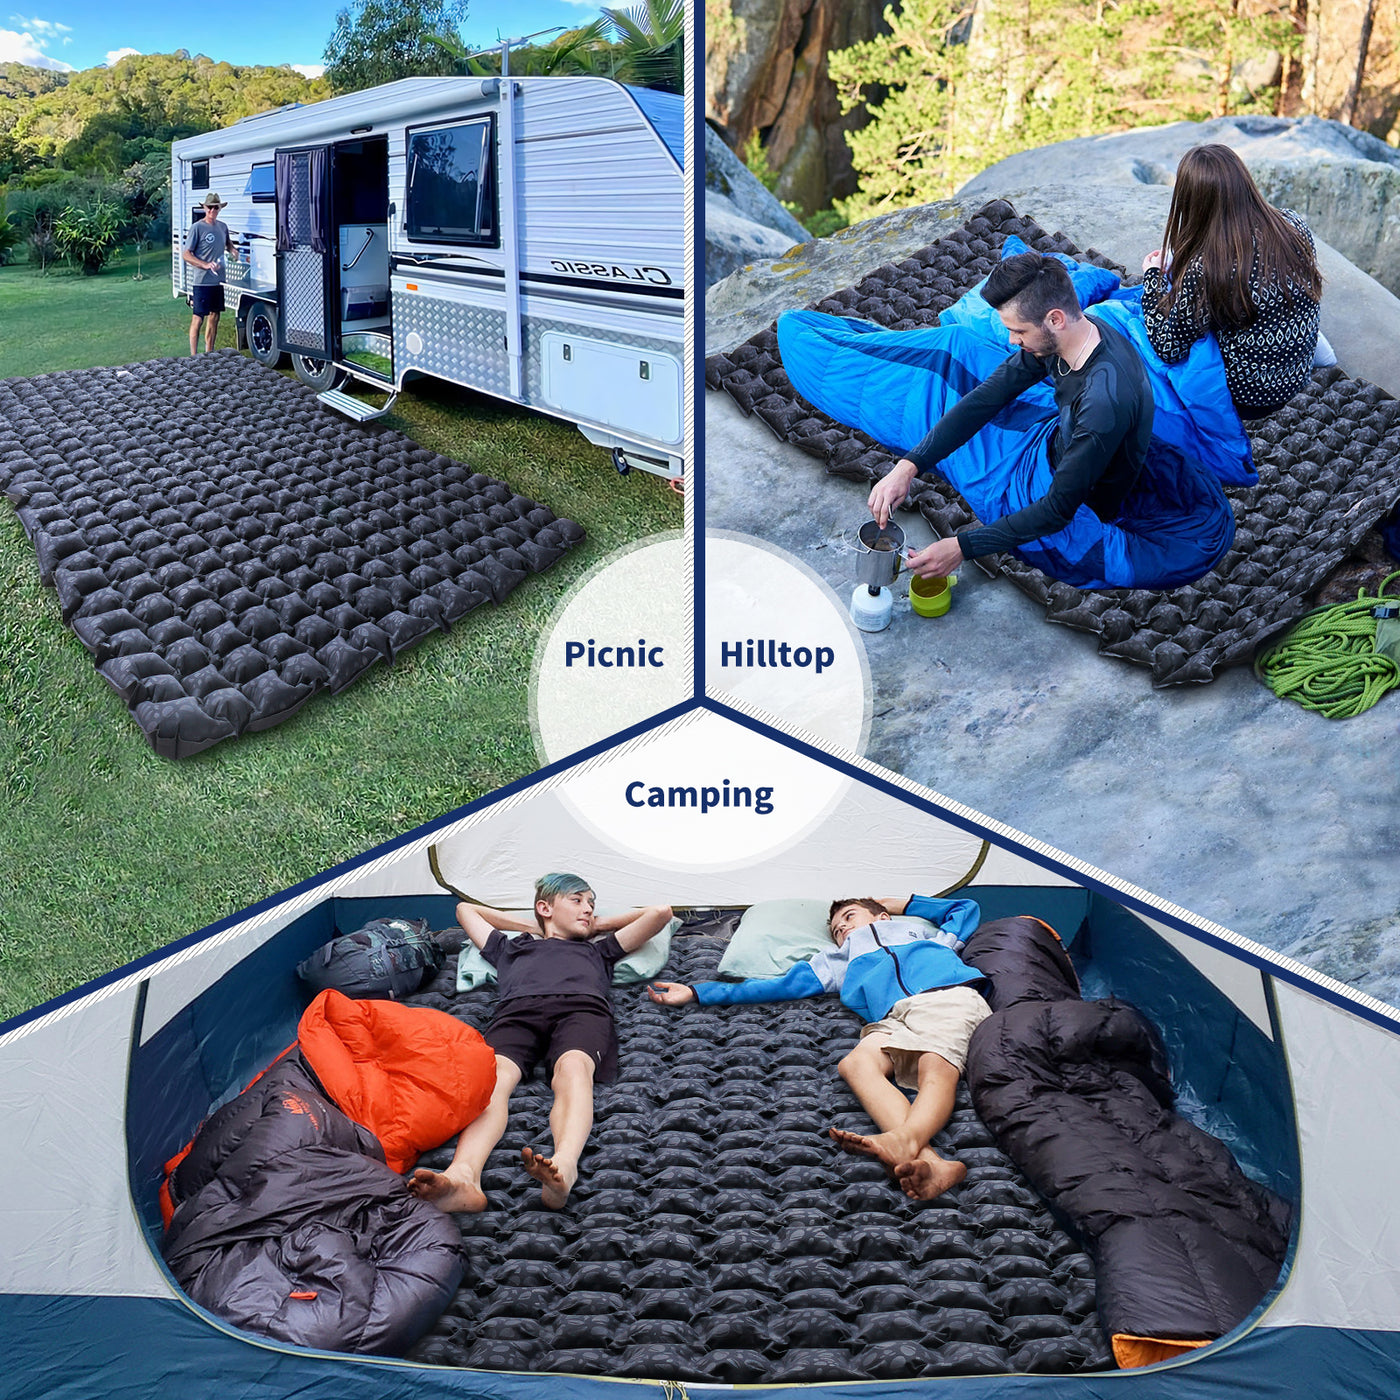 BeyondHOME Sleeping Pad for Camping - 1 Person & 2 Person-Blue